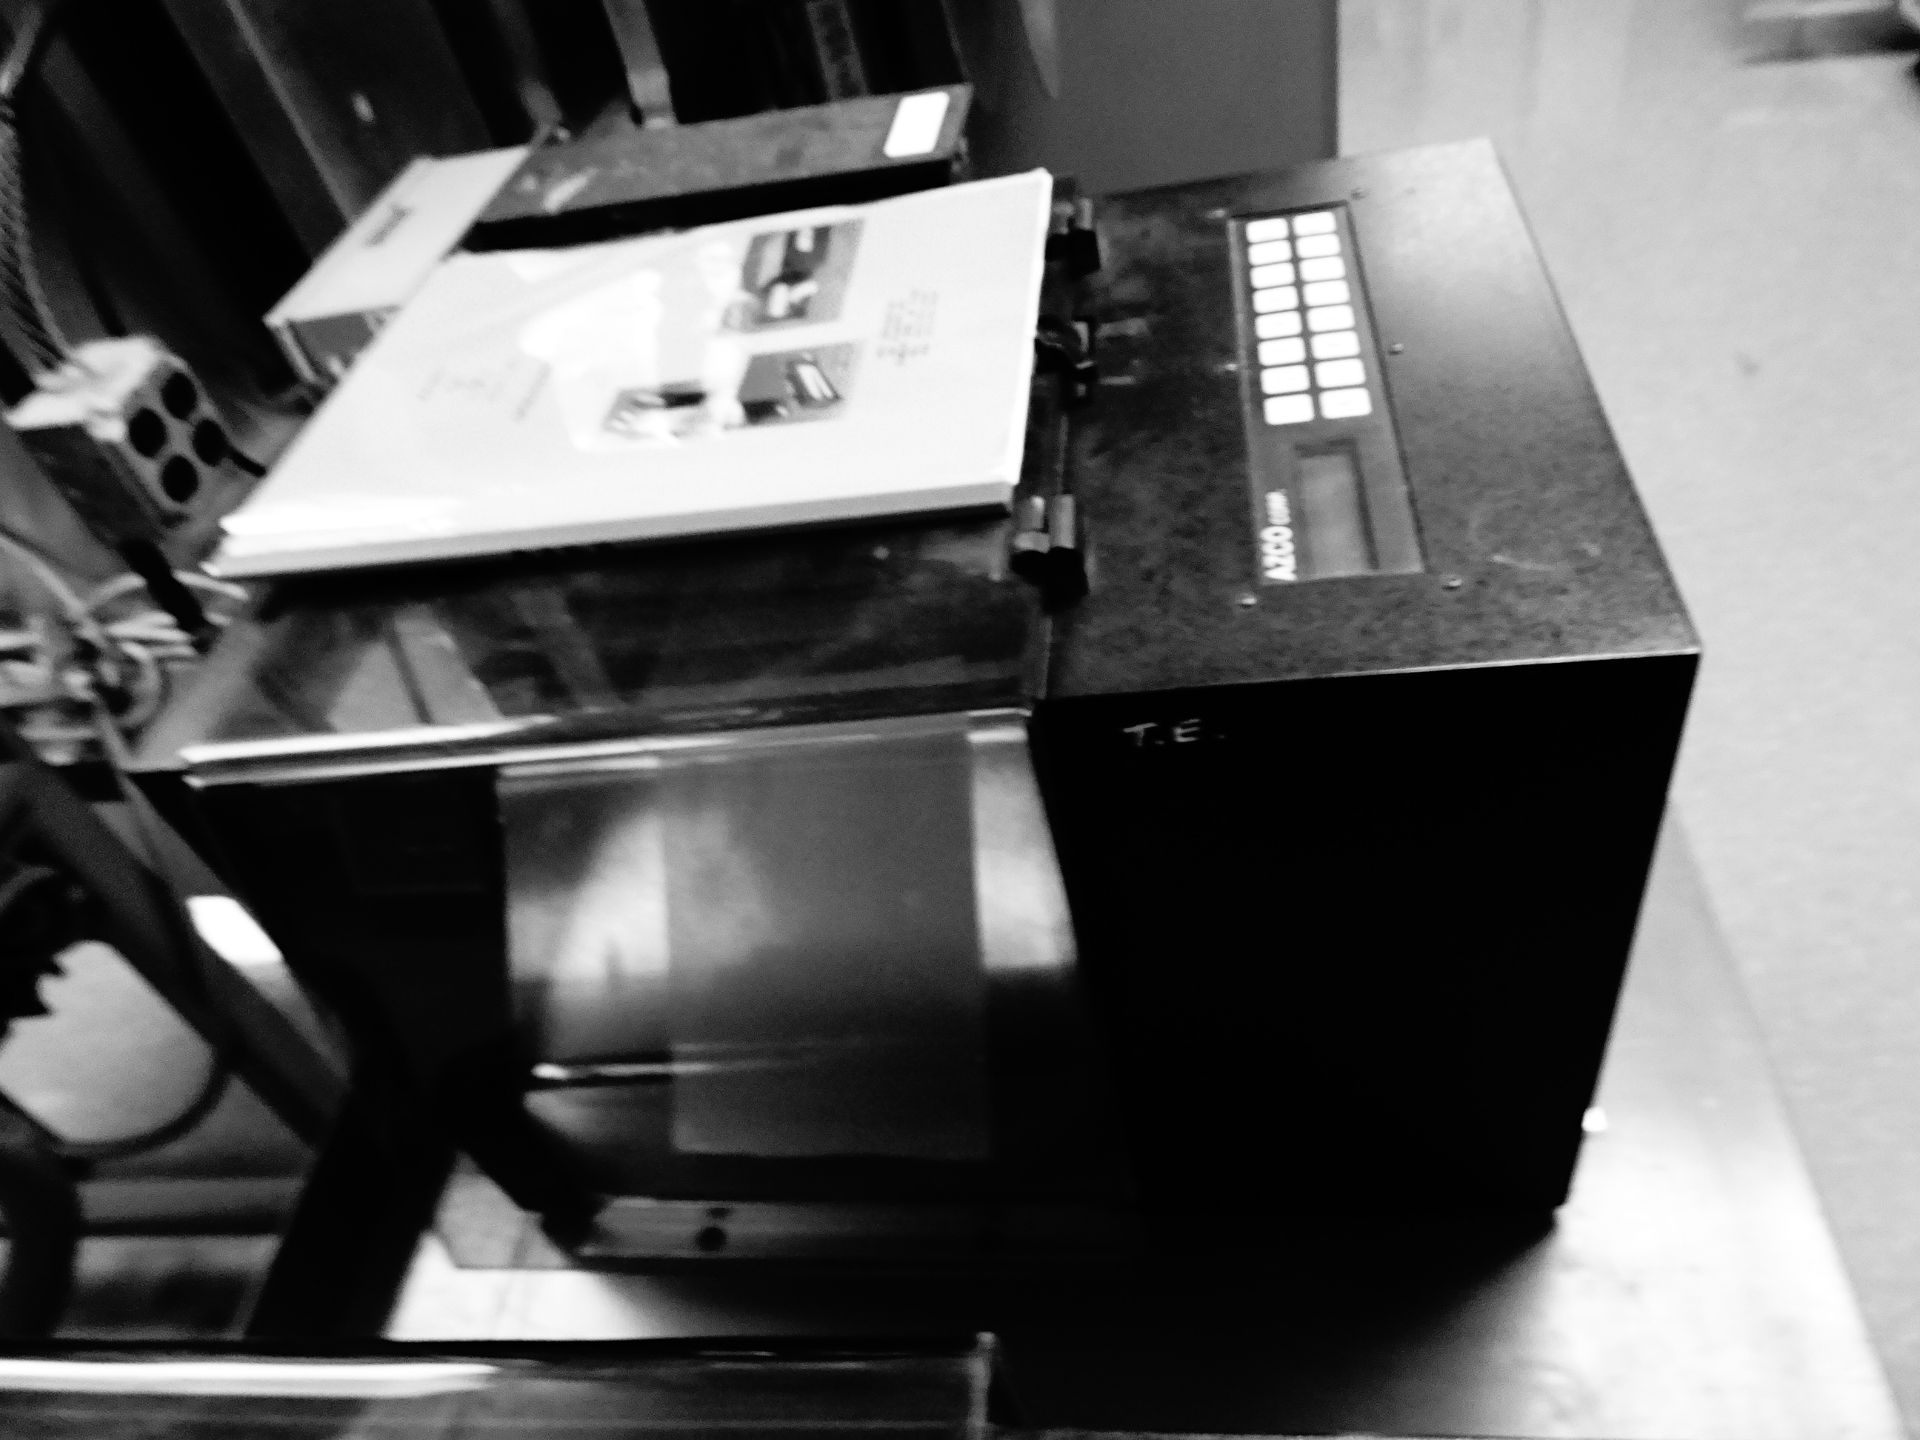 AZCO Sur-Size Model SS-6 Automatic Guillotine Cutter With Manual - Image 2 of 4